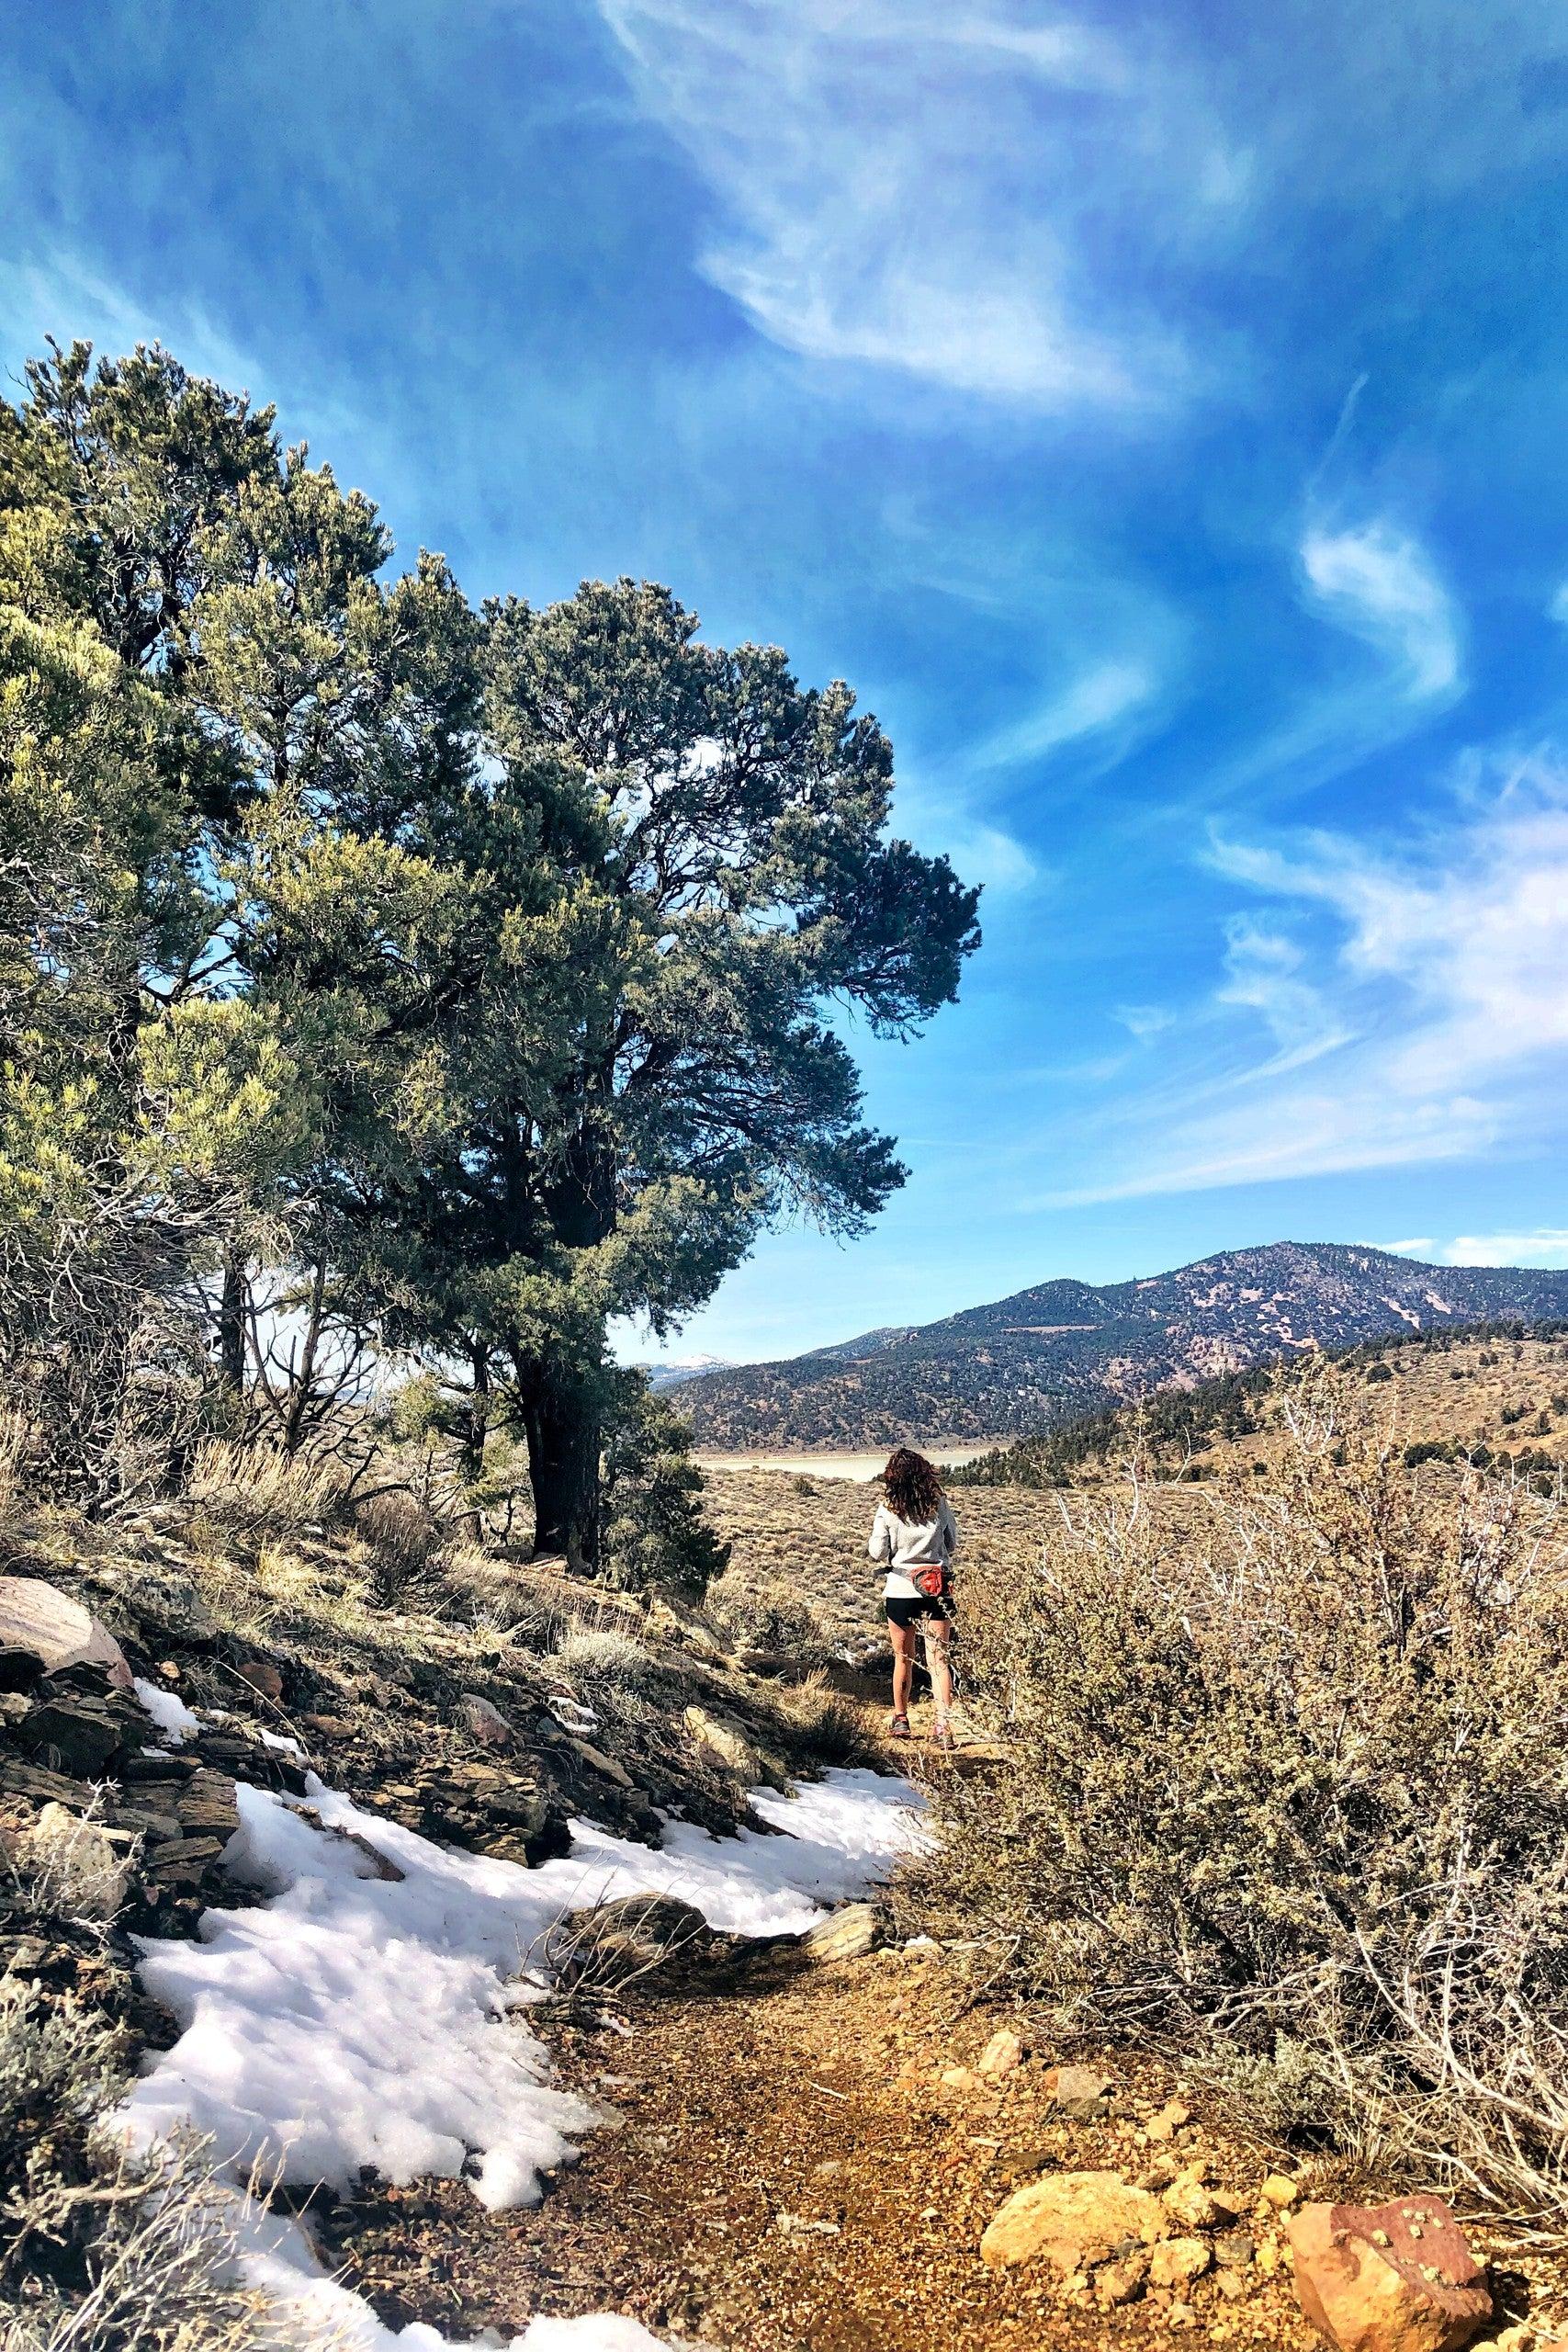 Pet Friendly Hike with a local to see Big Bear's Wild Burros